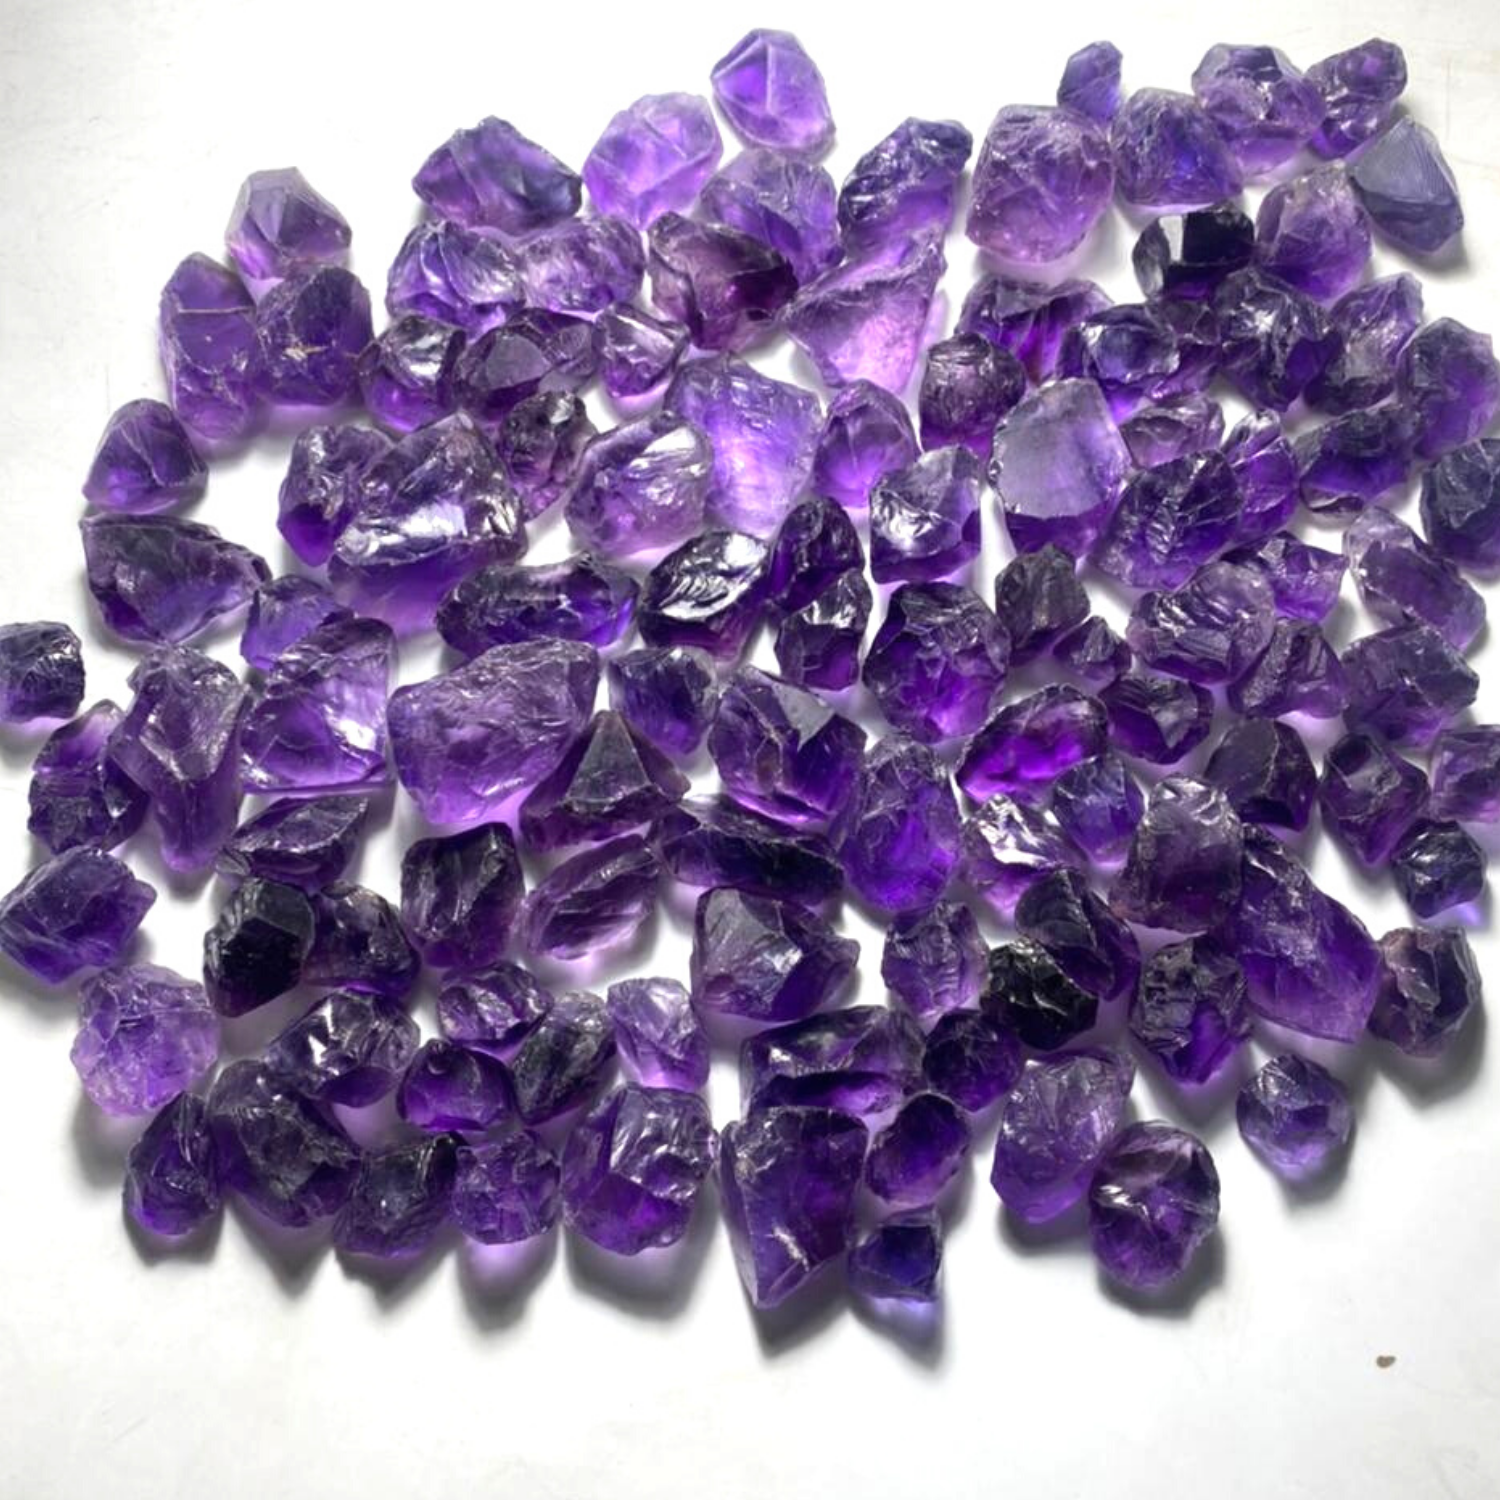 Faceting Rough Amethyst Stones for Gems Cutters